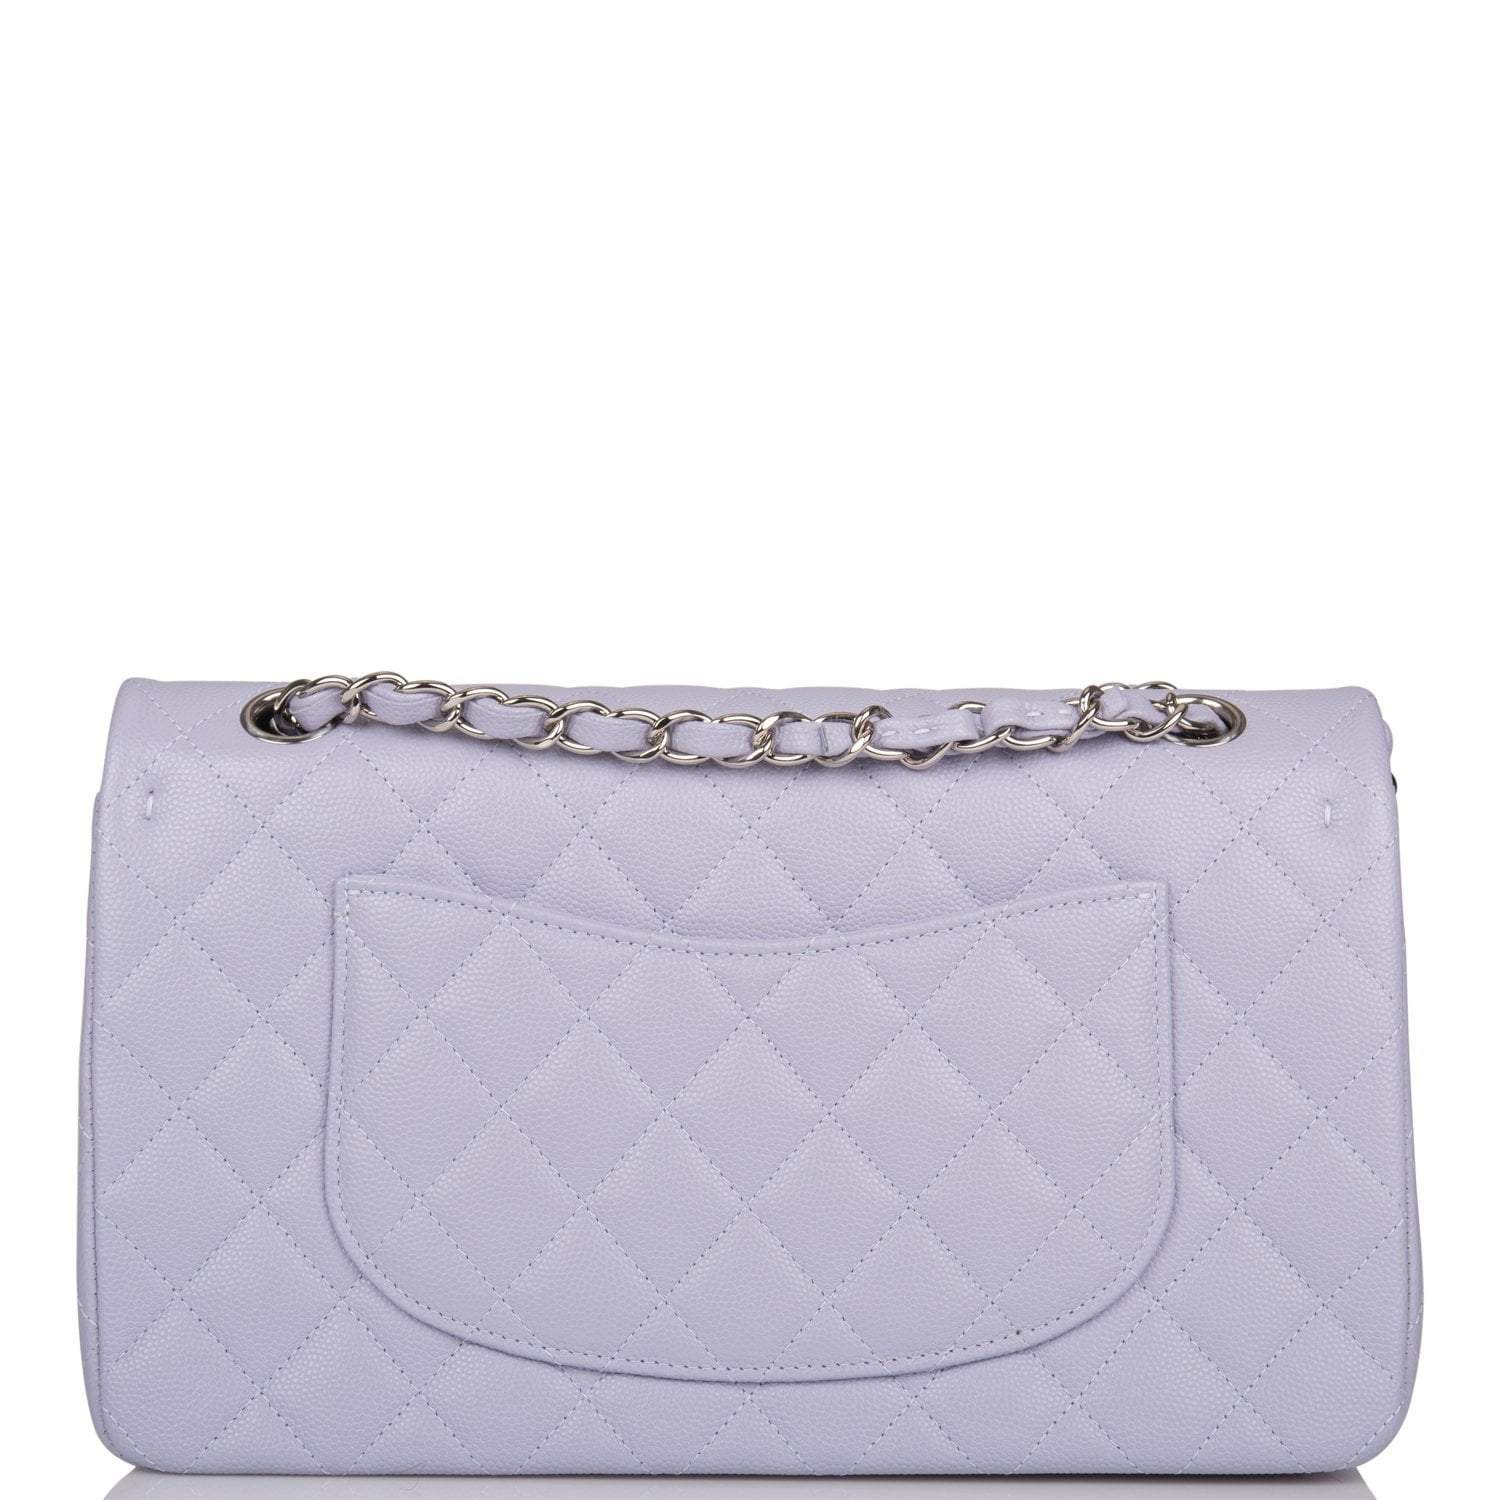 Chanel Medium Classic Double Flap Bag Lavender Quilted Caviar Silver Hardware